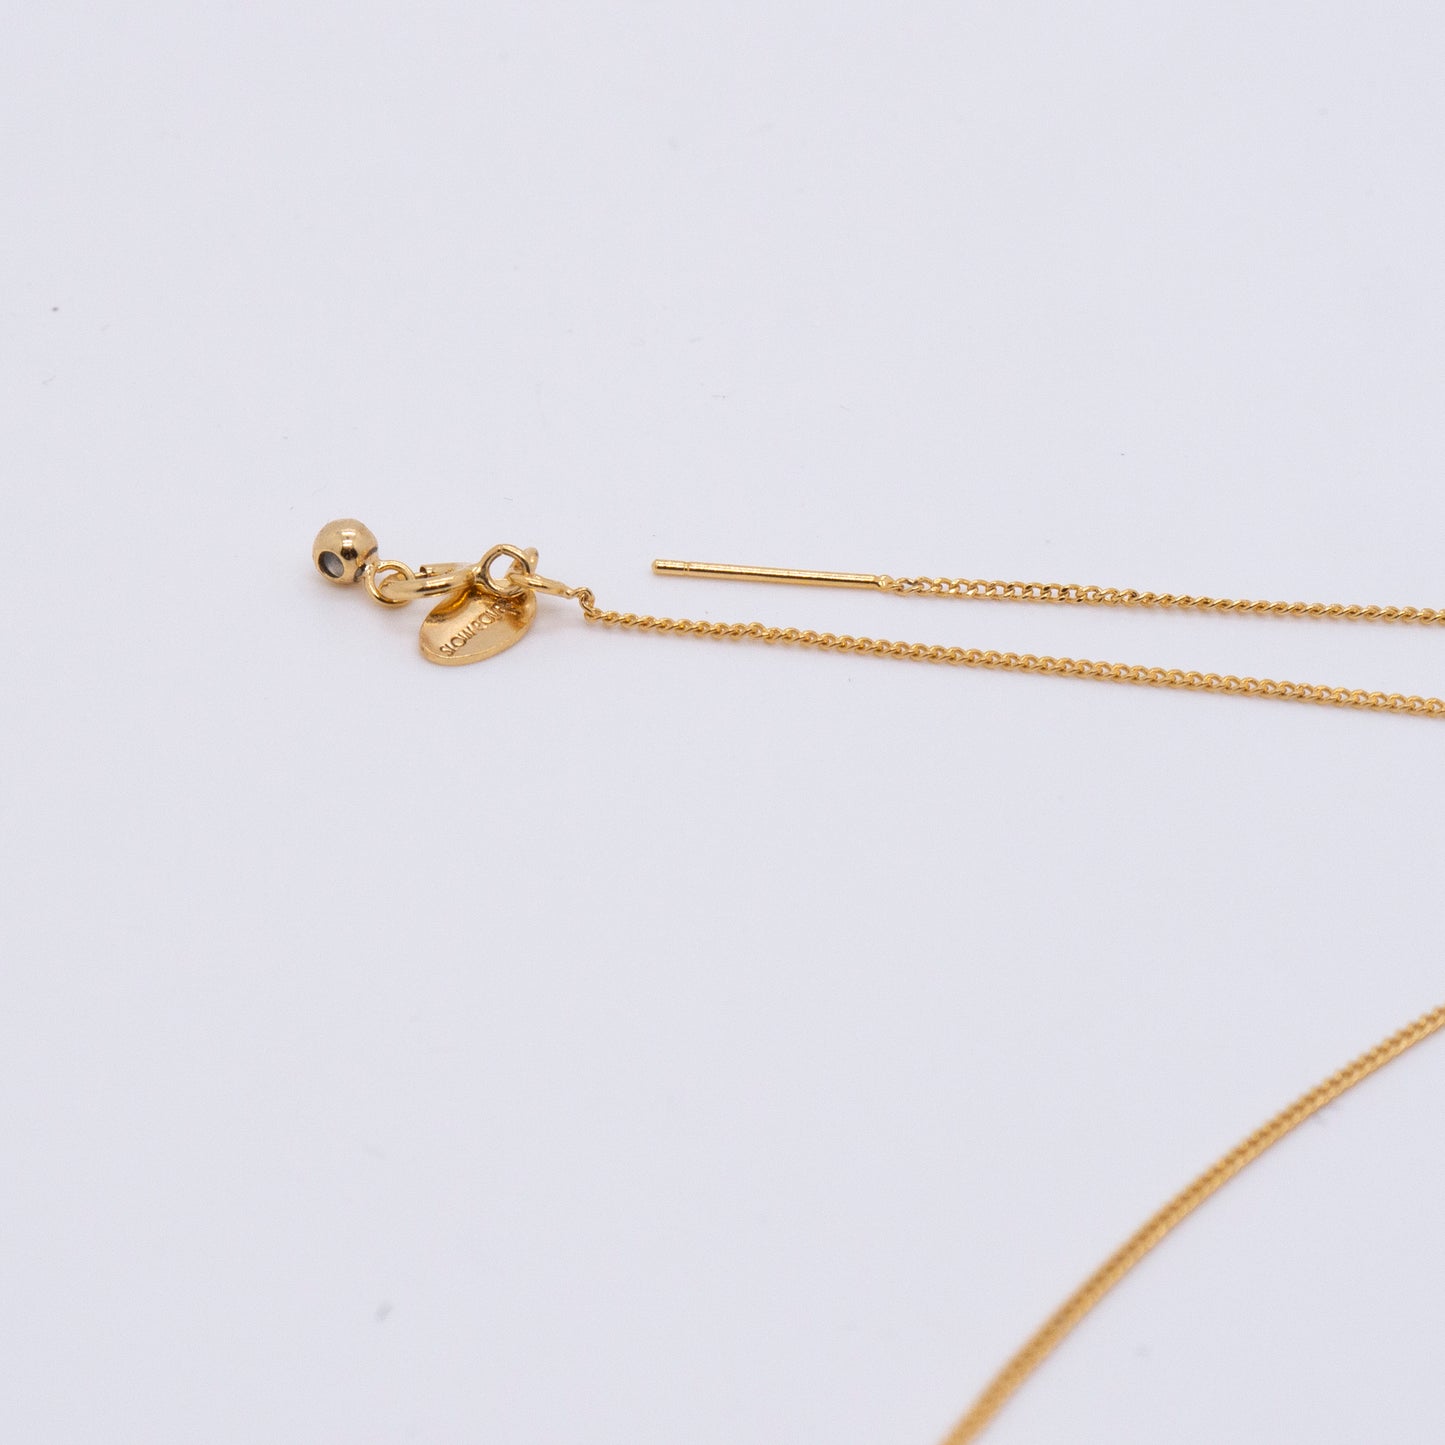 Space Ice - Herkimer Diamond Necklace (18K Gold Plated) 